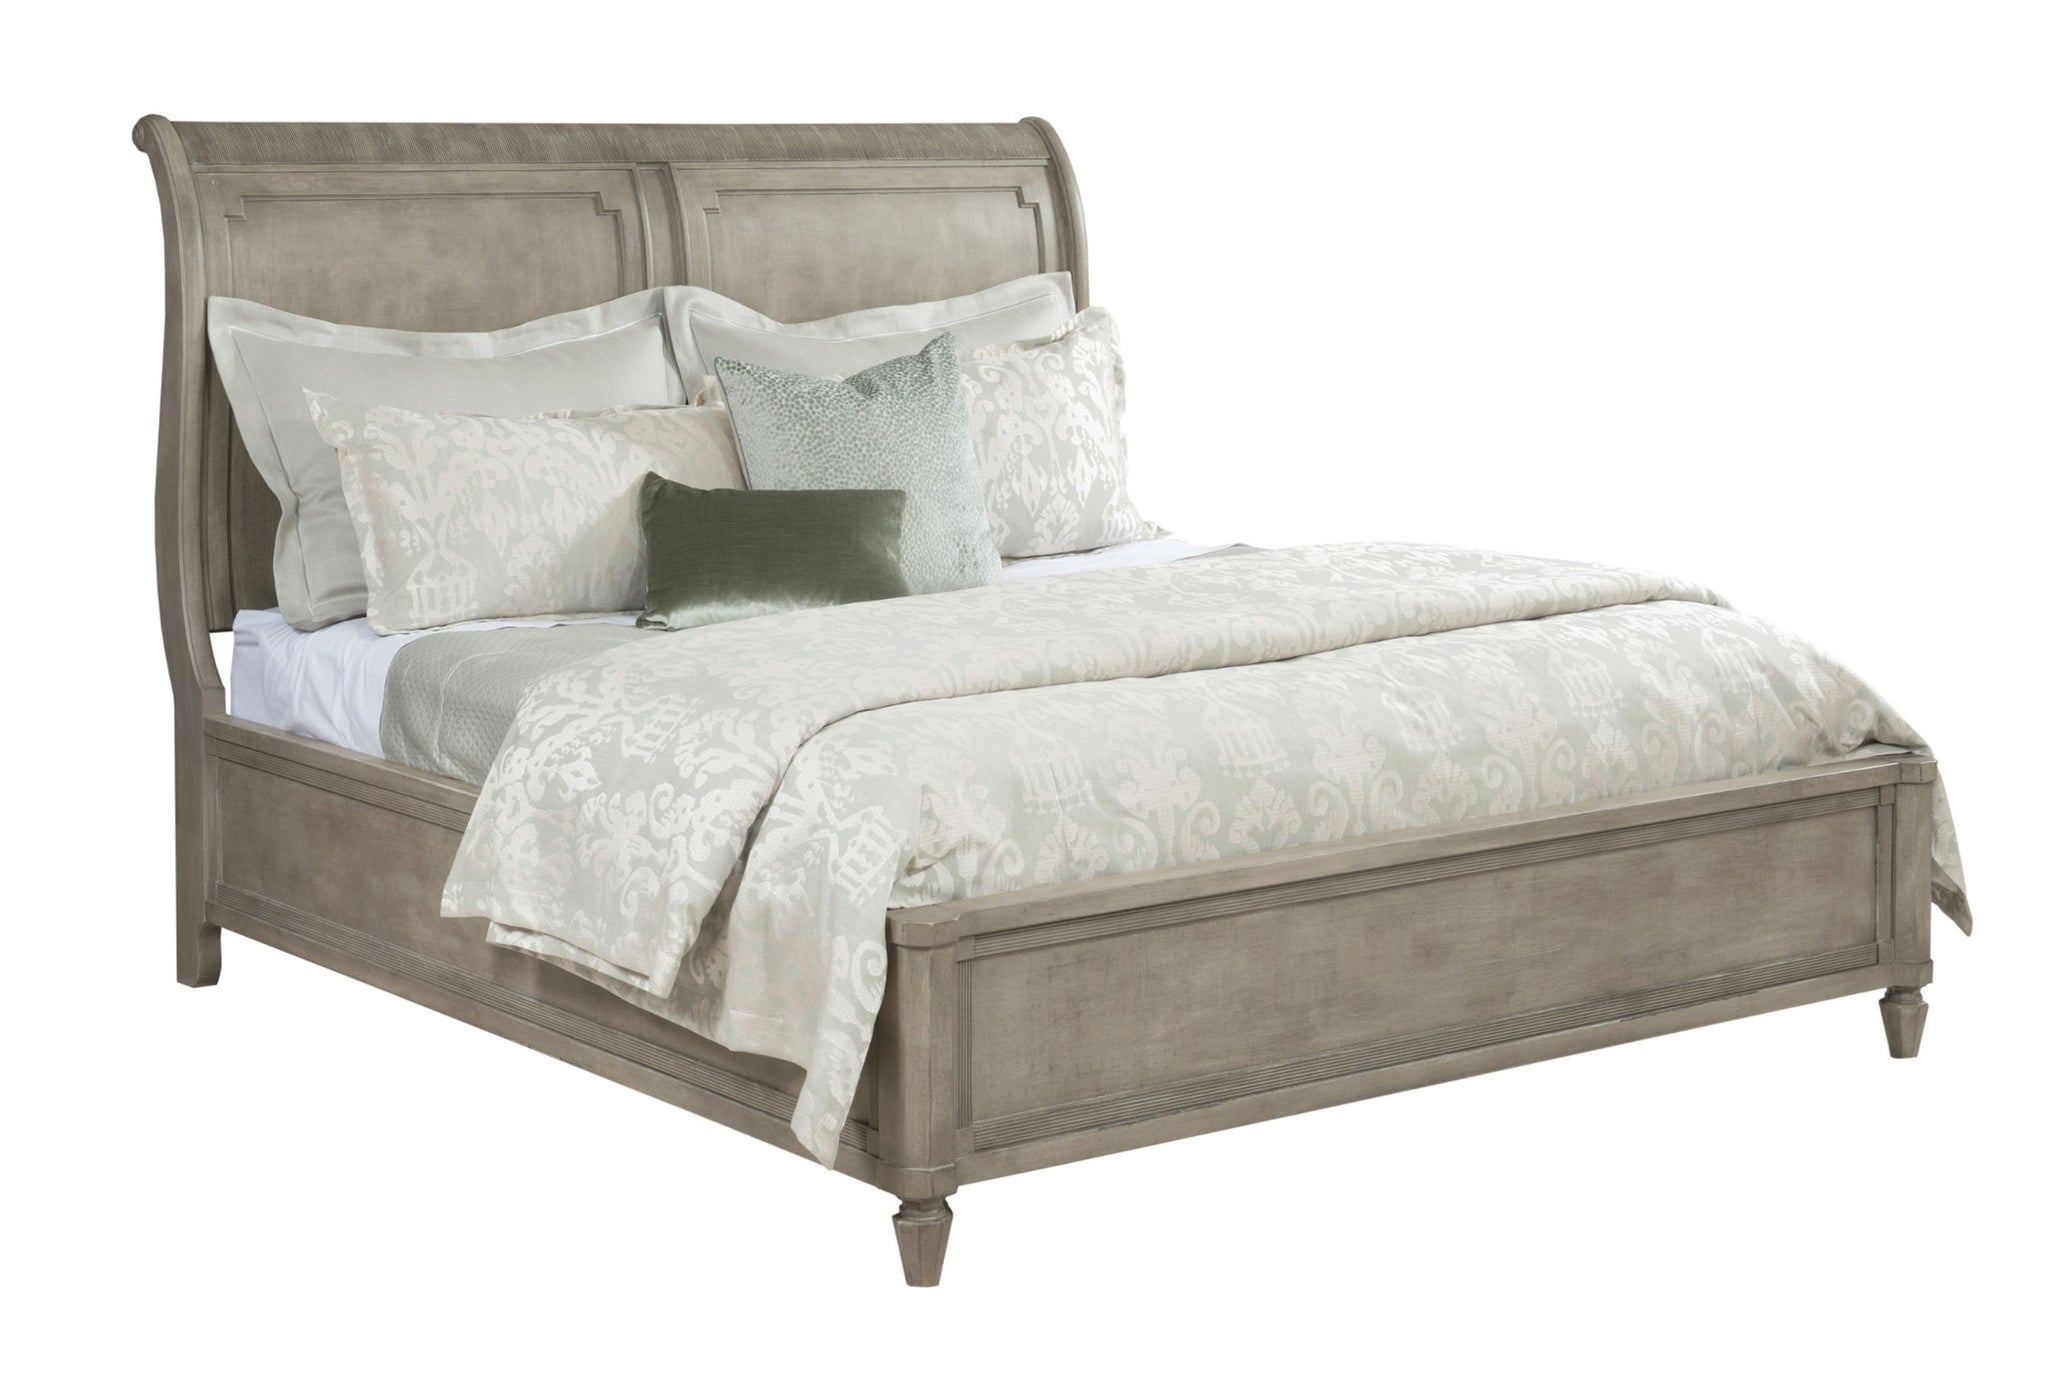 QUEEN ANNA SLEIGH BED 5/0 COMPLETE